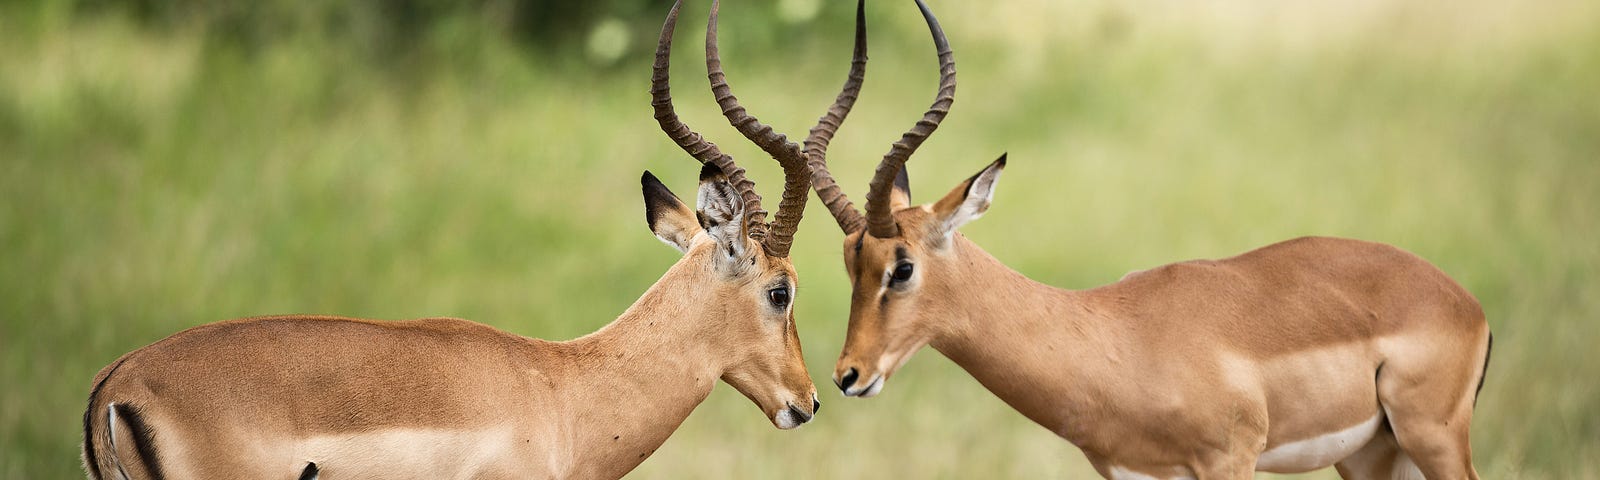 Two deer butting antlers